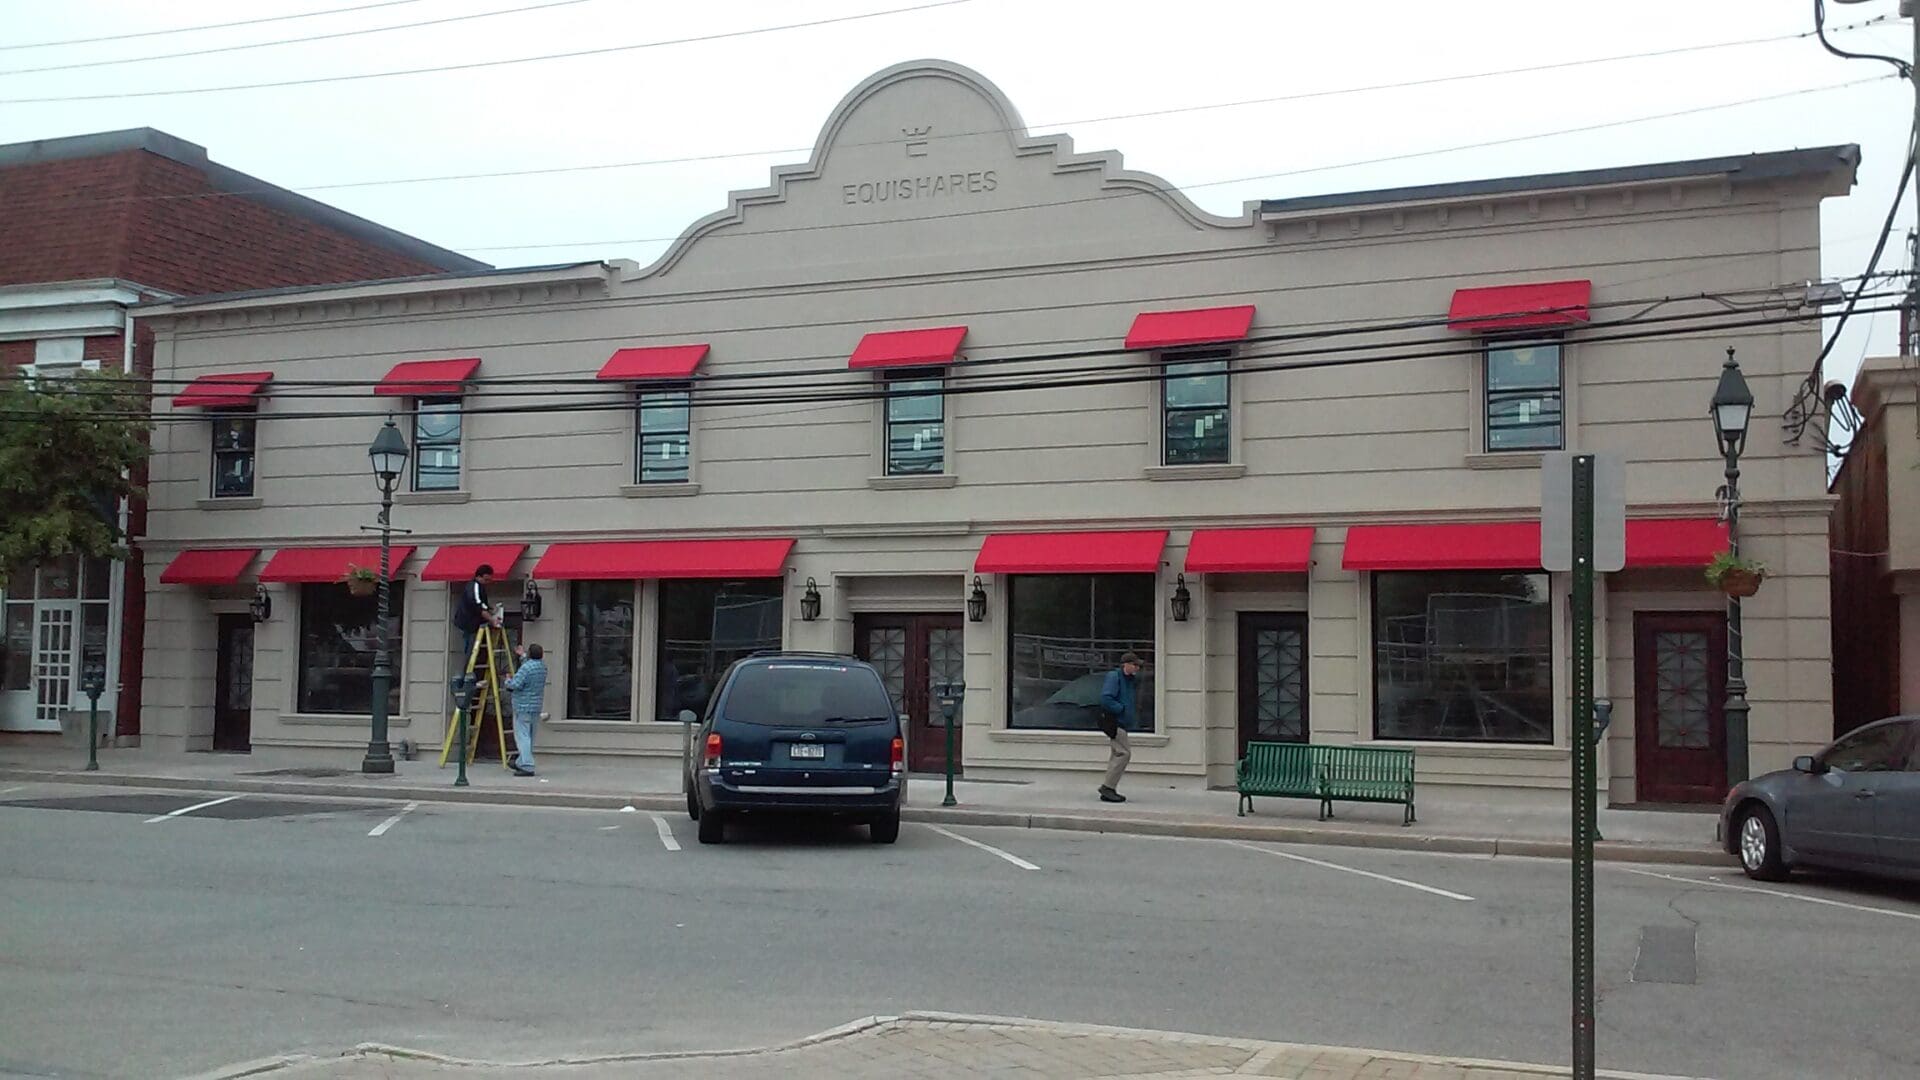 Exterior view of a beige building with red awnings, labeled 'ADP USA Solutions Gallery', featuring a man walking and another using a survey instrument by parked cars.